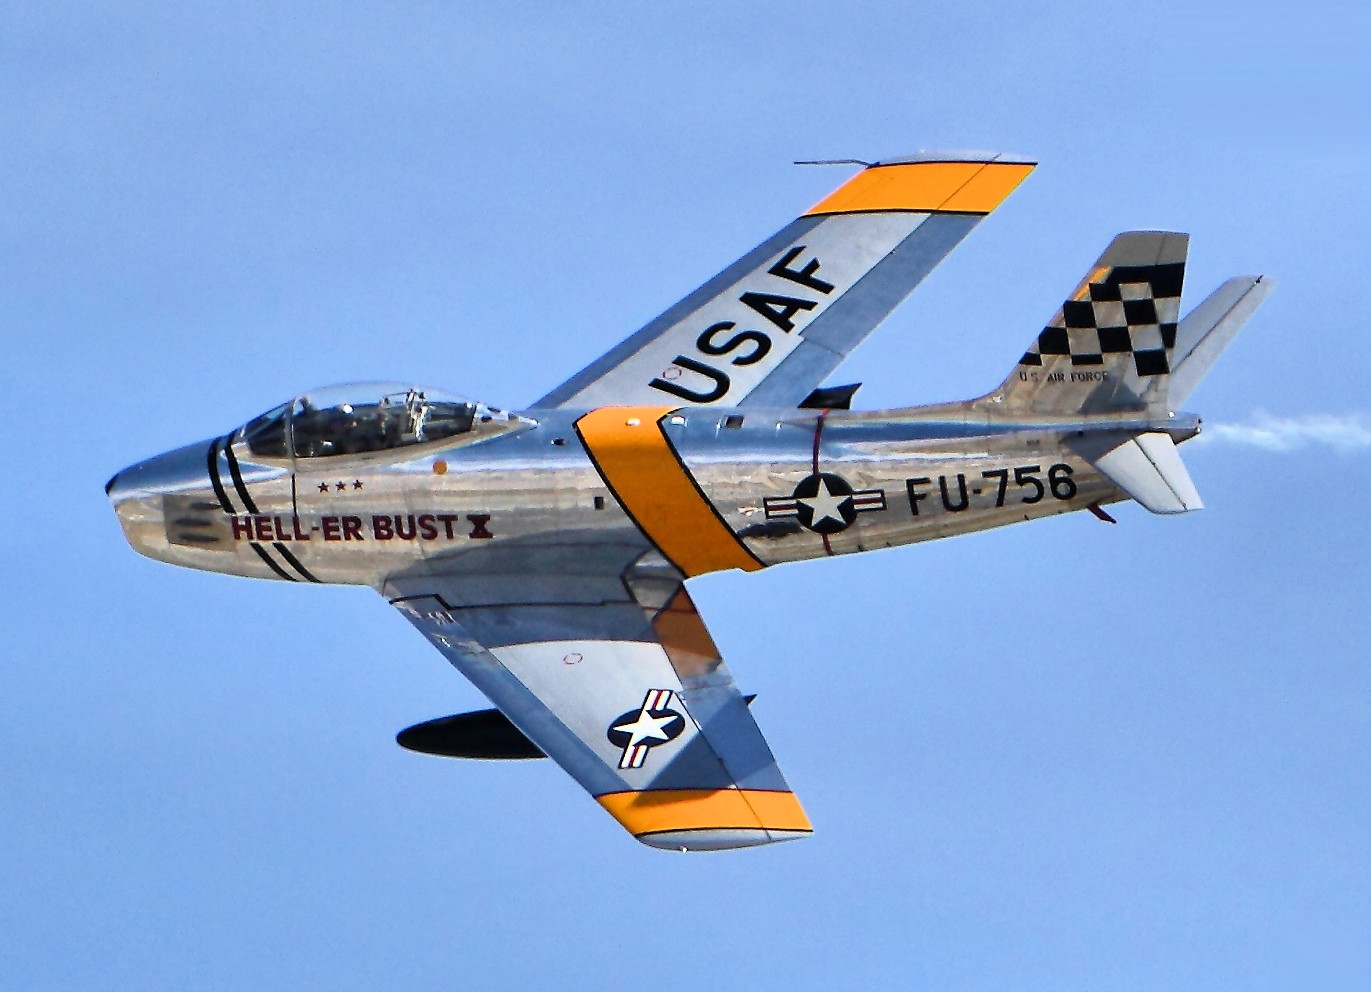 Interesting facts about North American F-86 Sabre